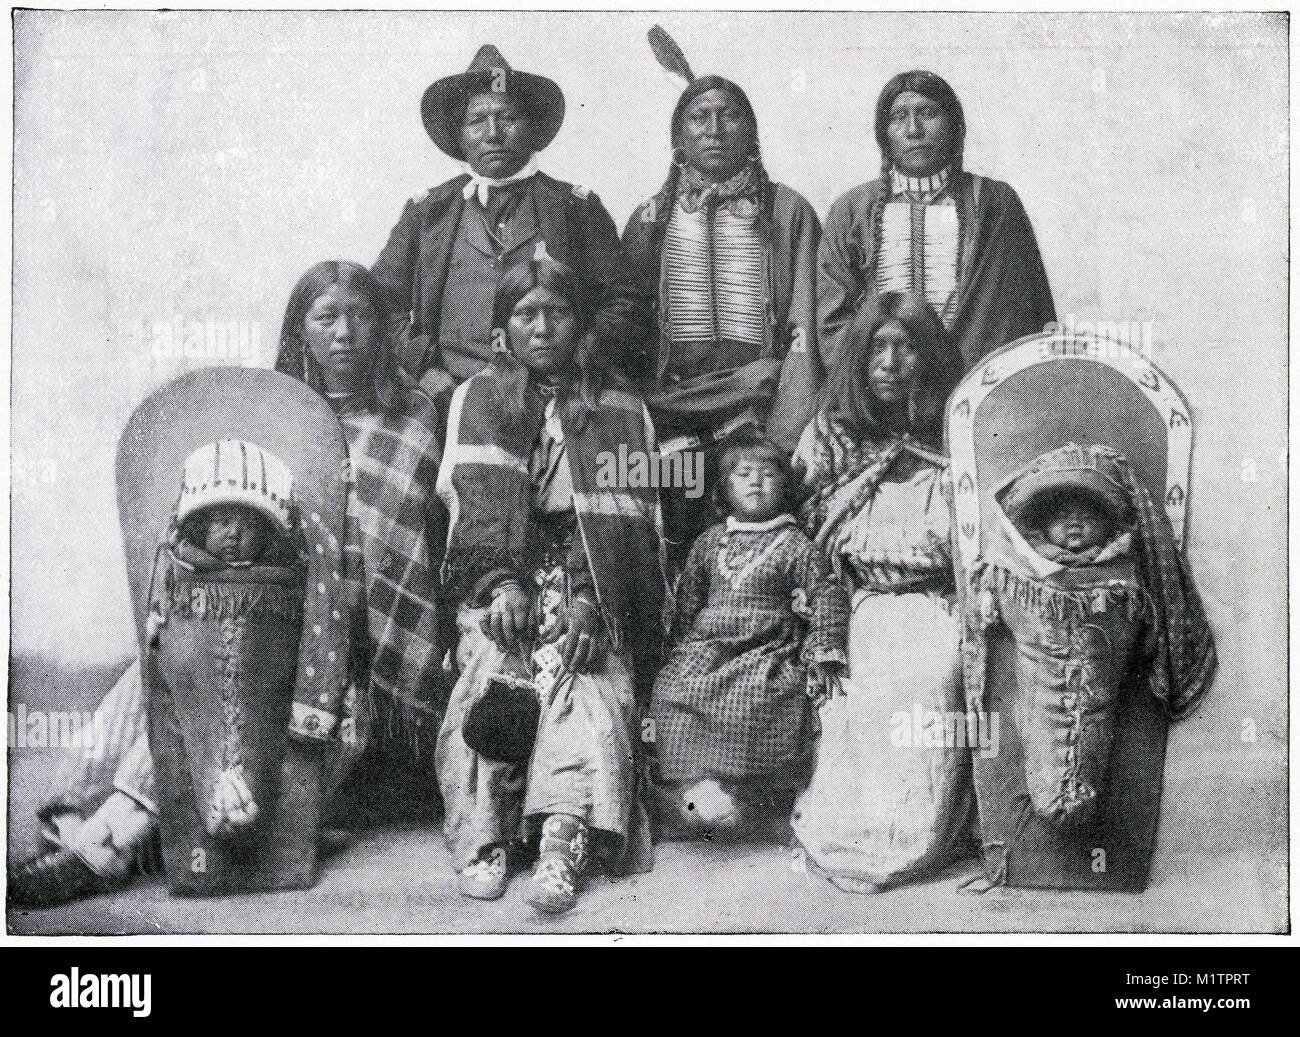 Halftone illustration of a North American Indian chief and his family, tribe unknown, circa 1900. From an original image in How Other People Live by H. Clive Barnard, 1918. Stock Photo